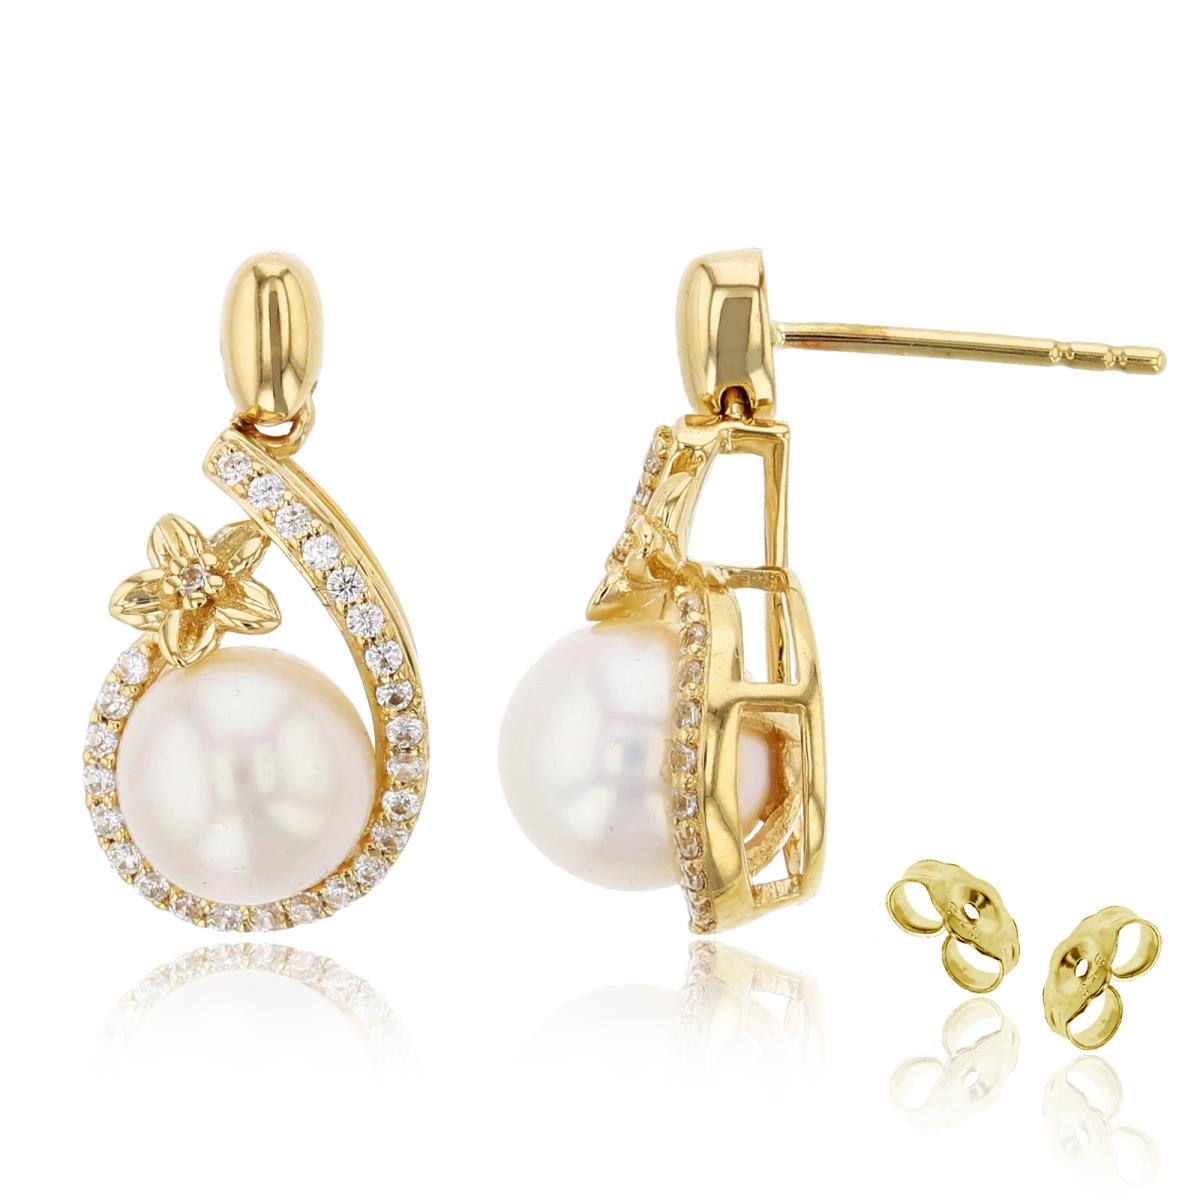 10K Yellow Gold 0.21 CTTW Rnd Diam & 7mm Rnd White Pearl with Flower PS-shape Earring